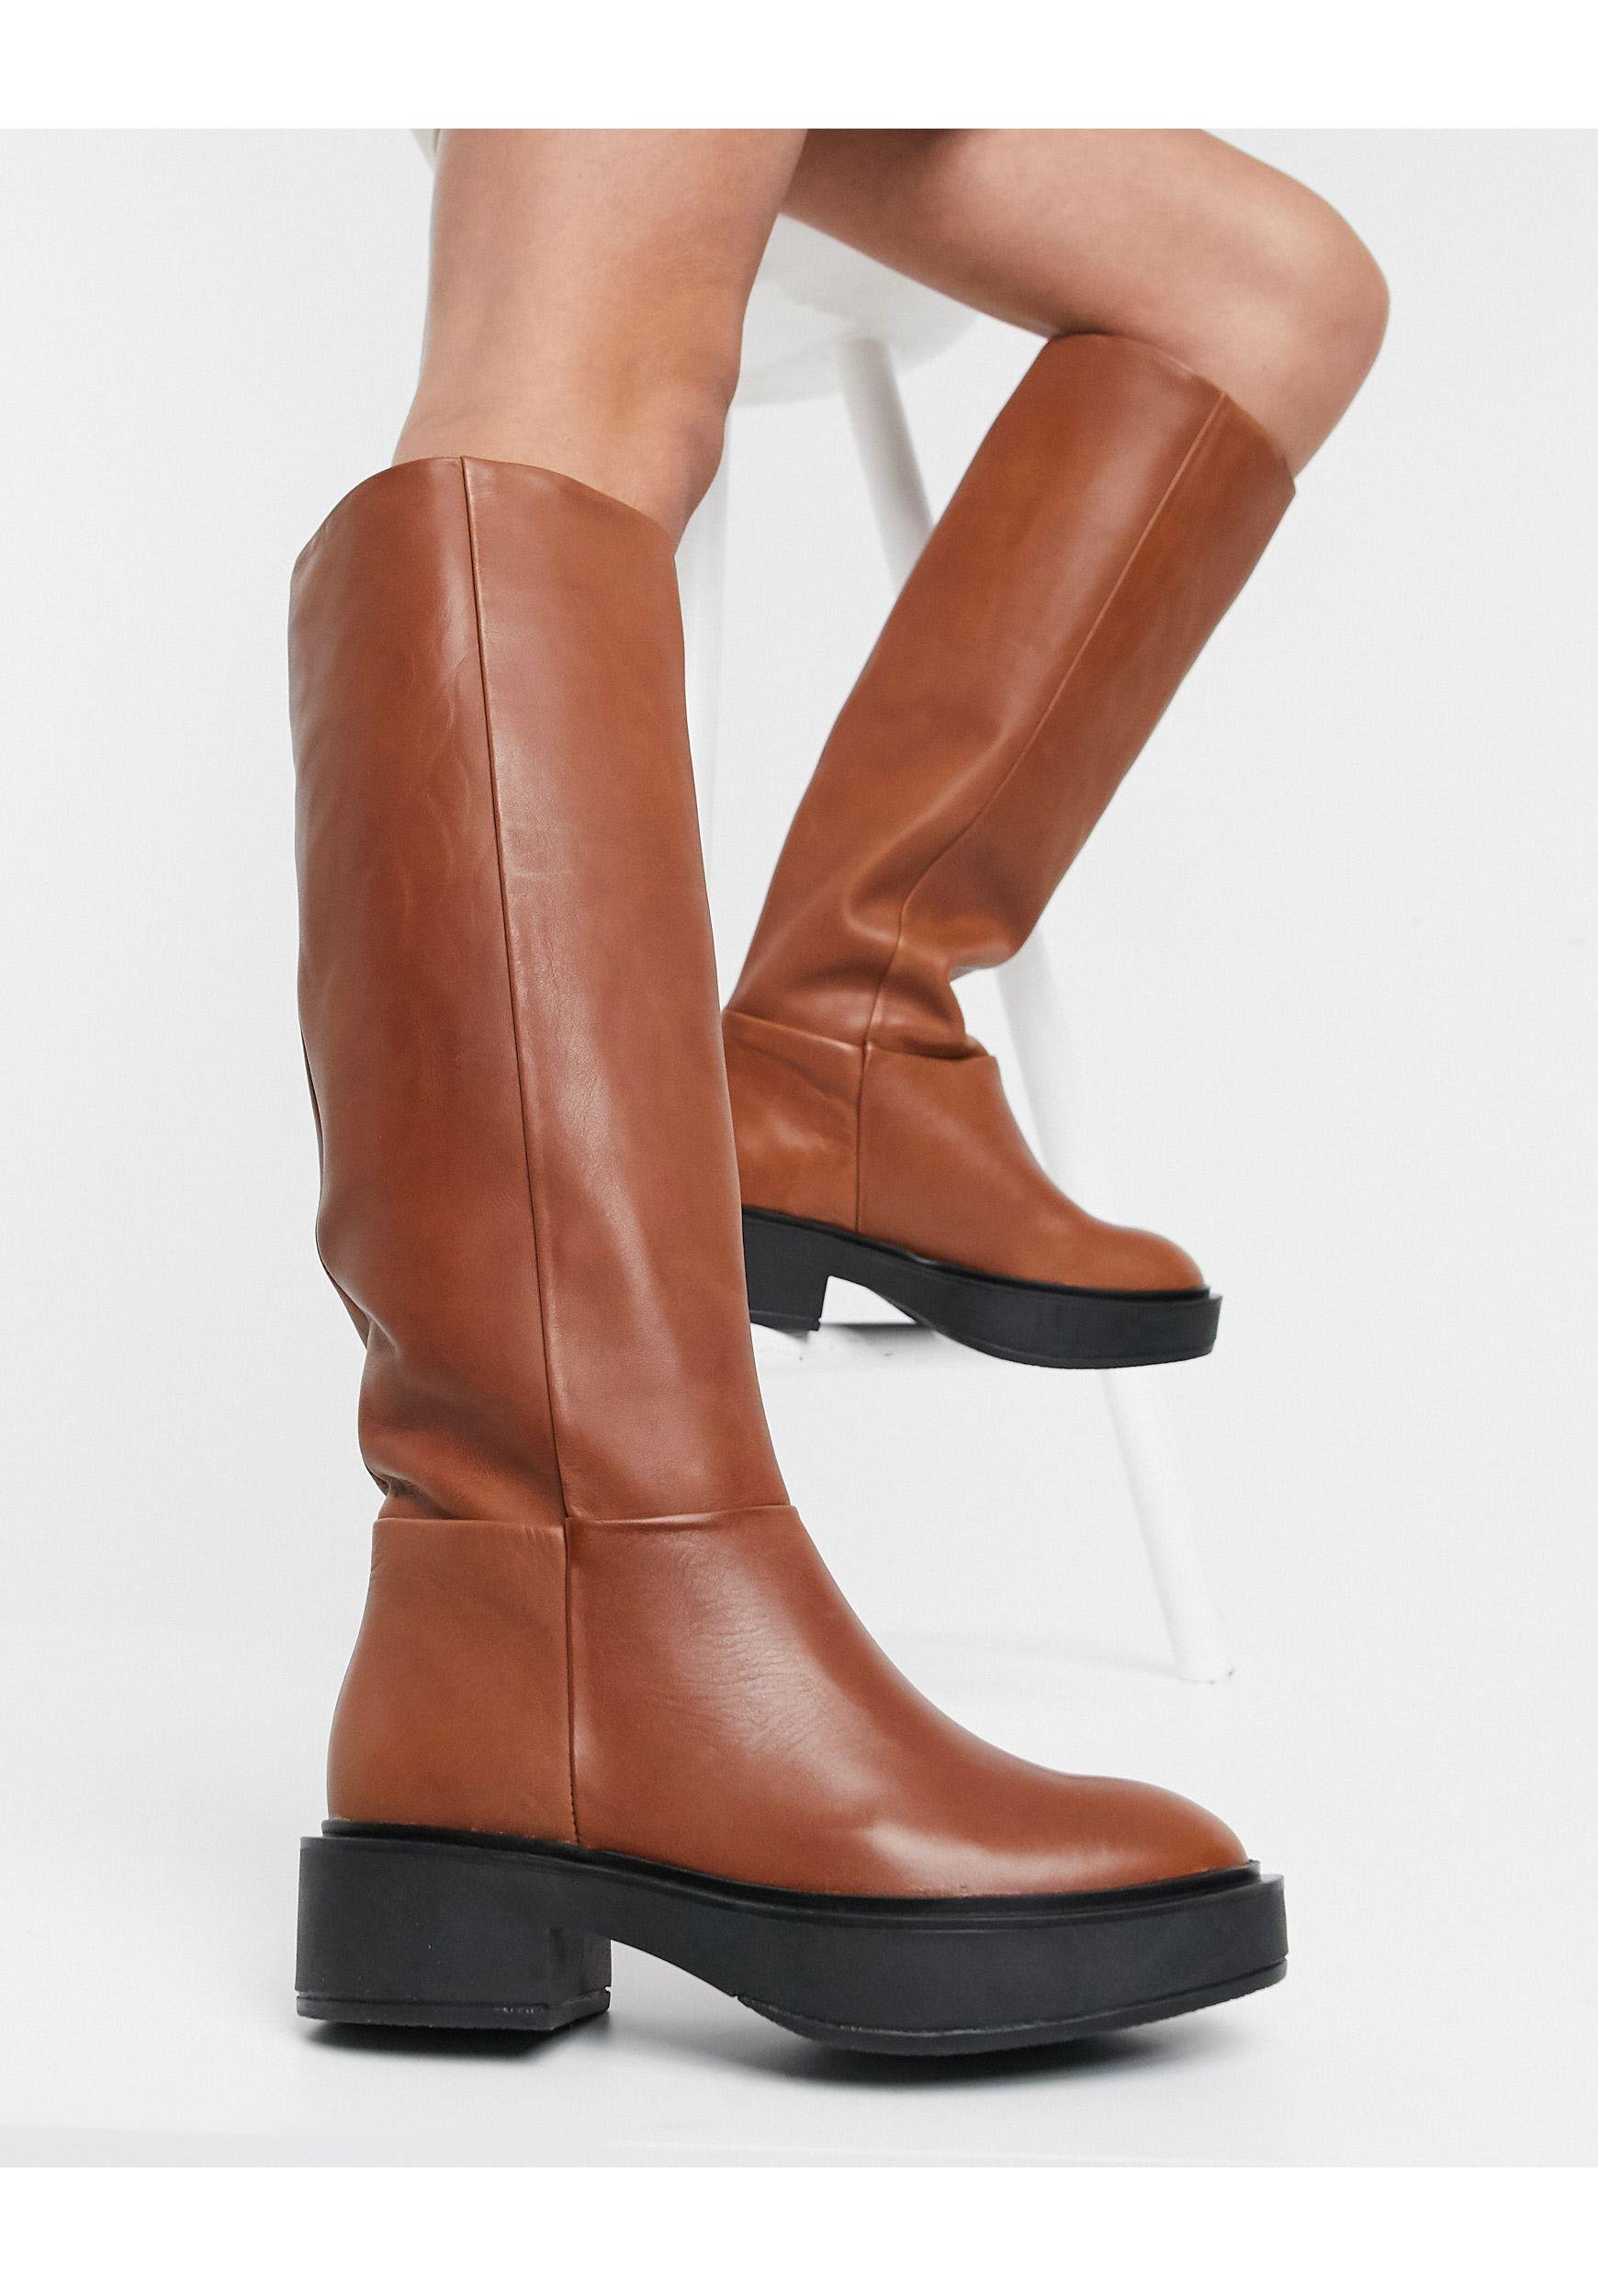 Mango Leather Calf Length Boots in Tan (Brown) - Lyst